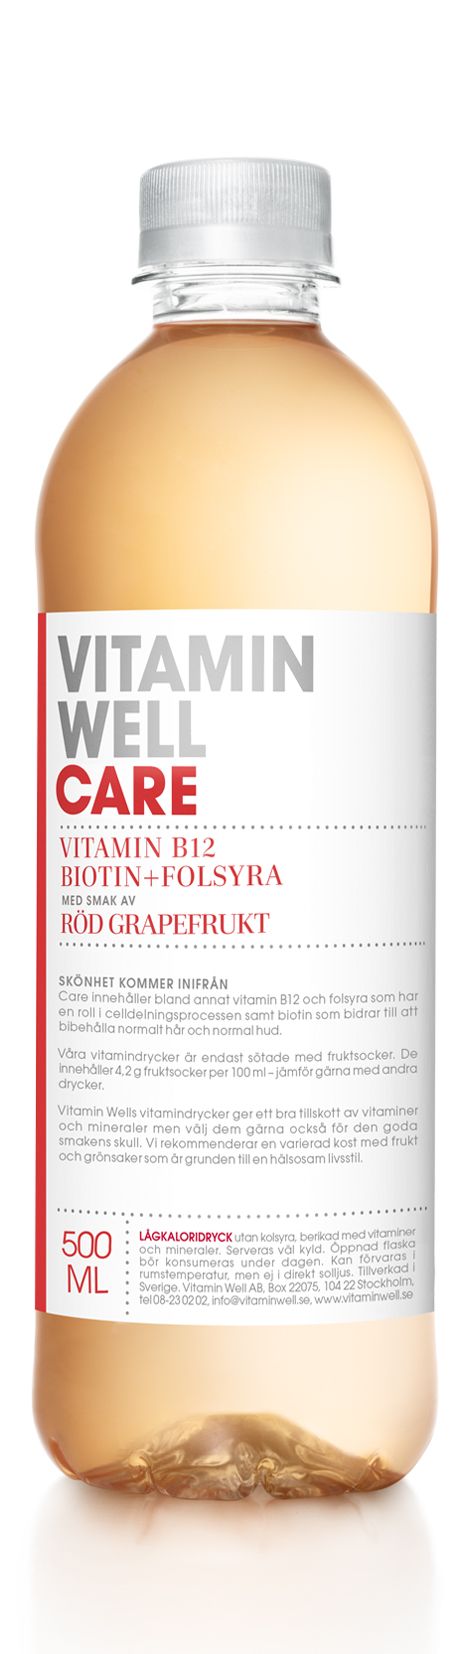 Vitamin Well Care